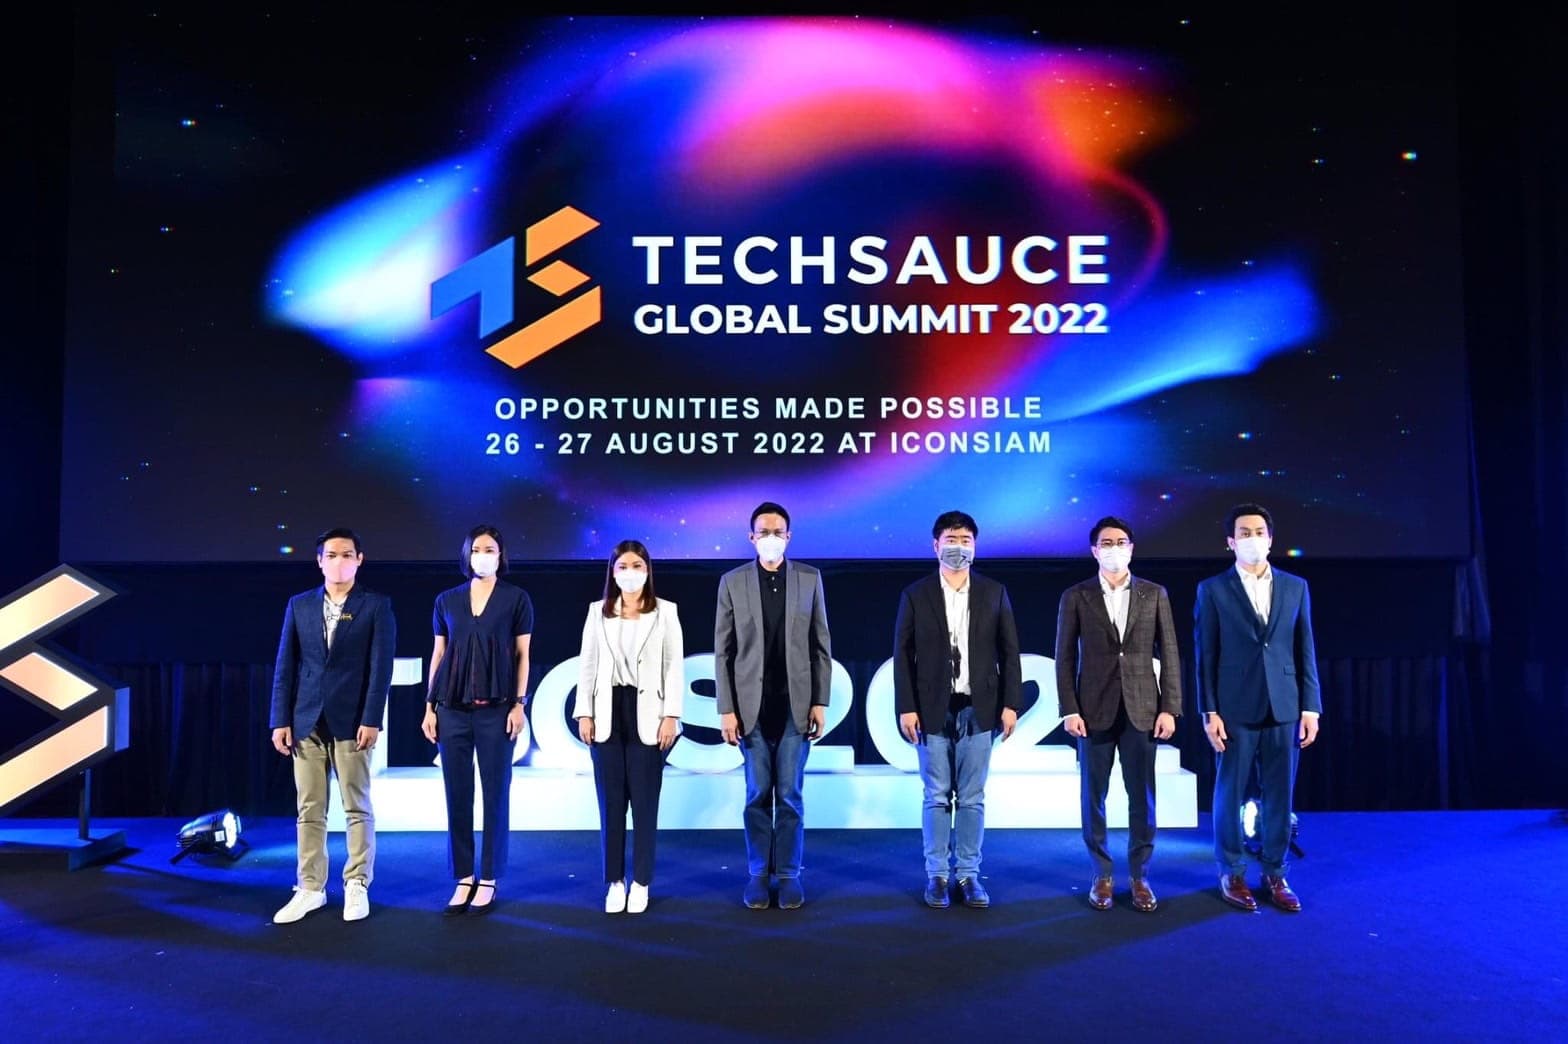 Techsauce Joins Forces with Partners to Host “Techsauce Global Summit 2022”